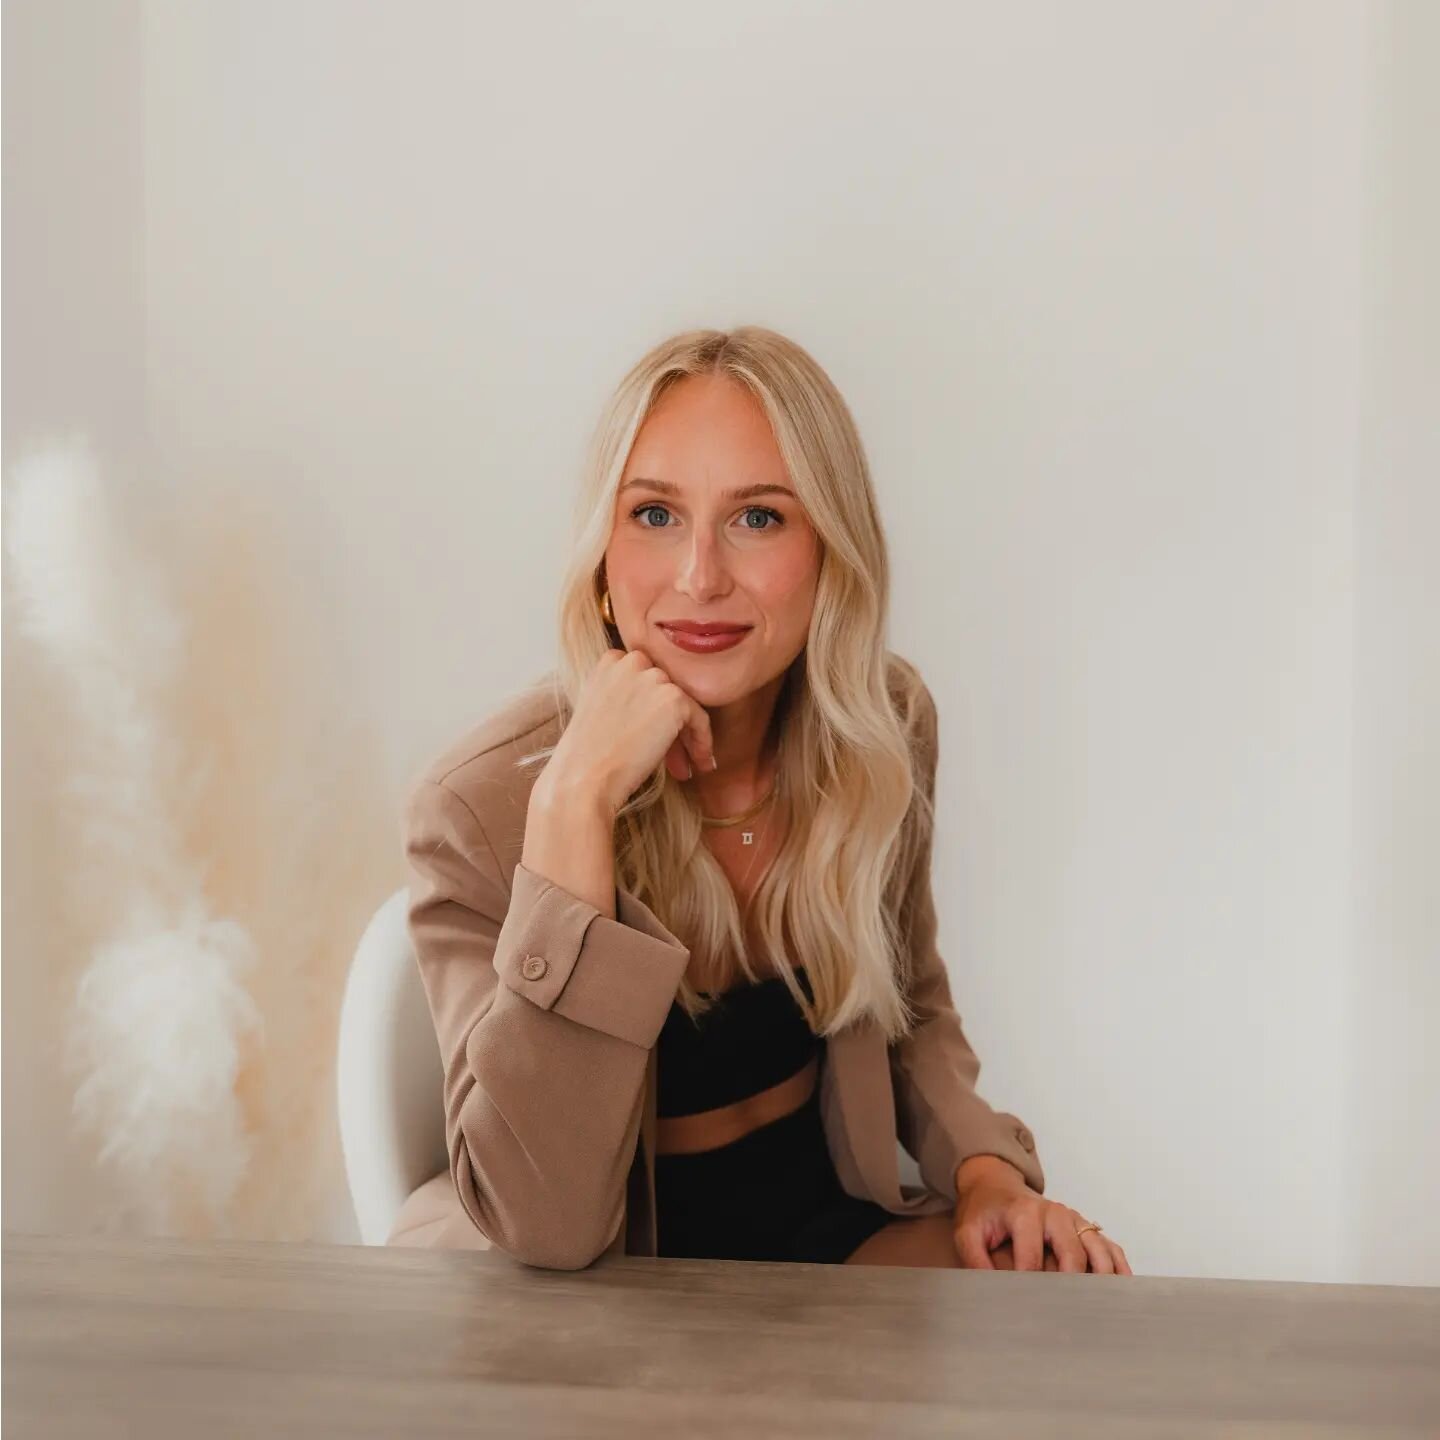 hi ☺️ for those of you that don't know me, i'm kailee - the owner of blendy &amp; trendy hair co! ⁣
⁣
I wanted to share a few things about myself in case you may be new around here! ⁣
⁣
&ndash; I specialize in lived in colour / balayage (blondes, bro